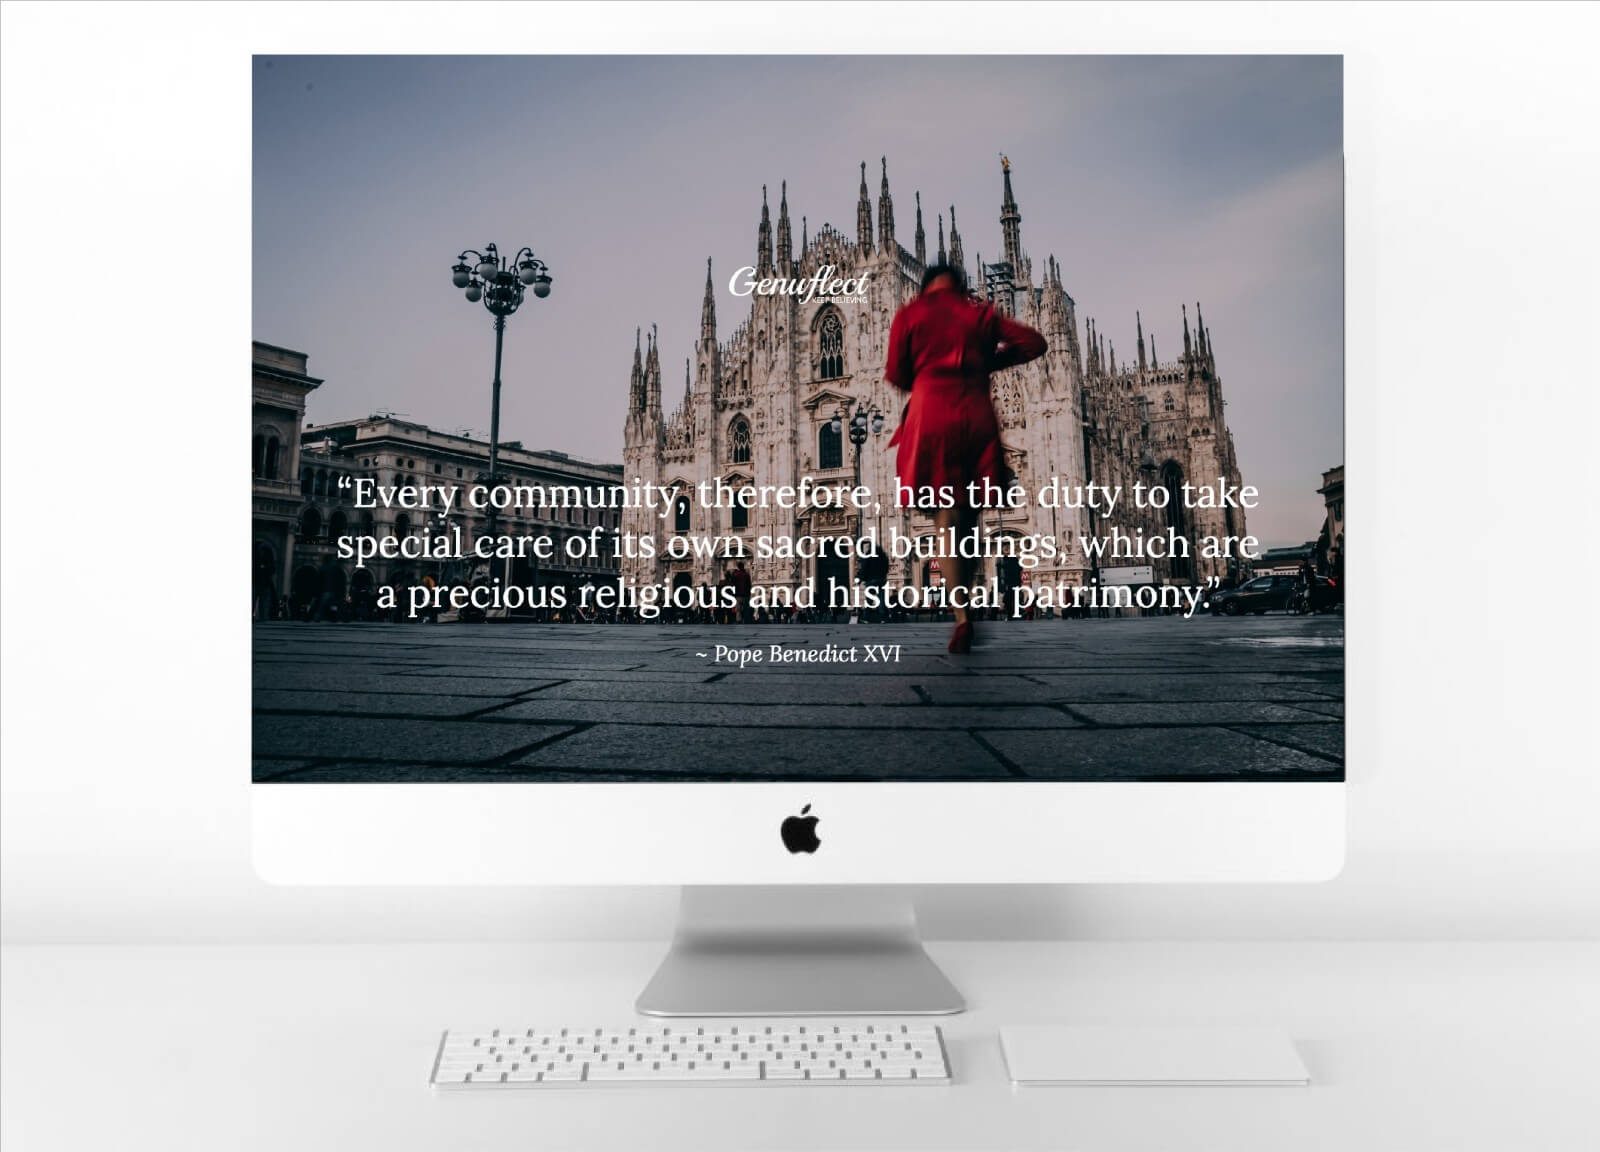 Background image on computer of Woman in red overcoat walking outside in front of a Catholic Basilica